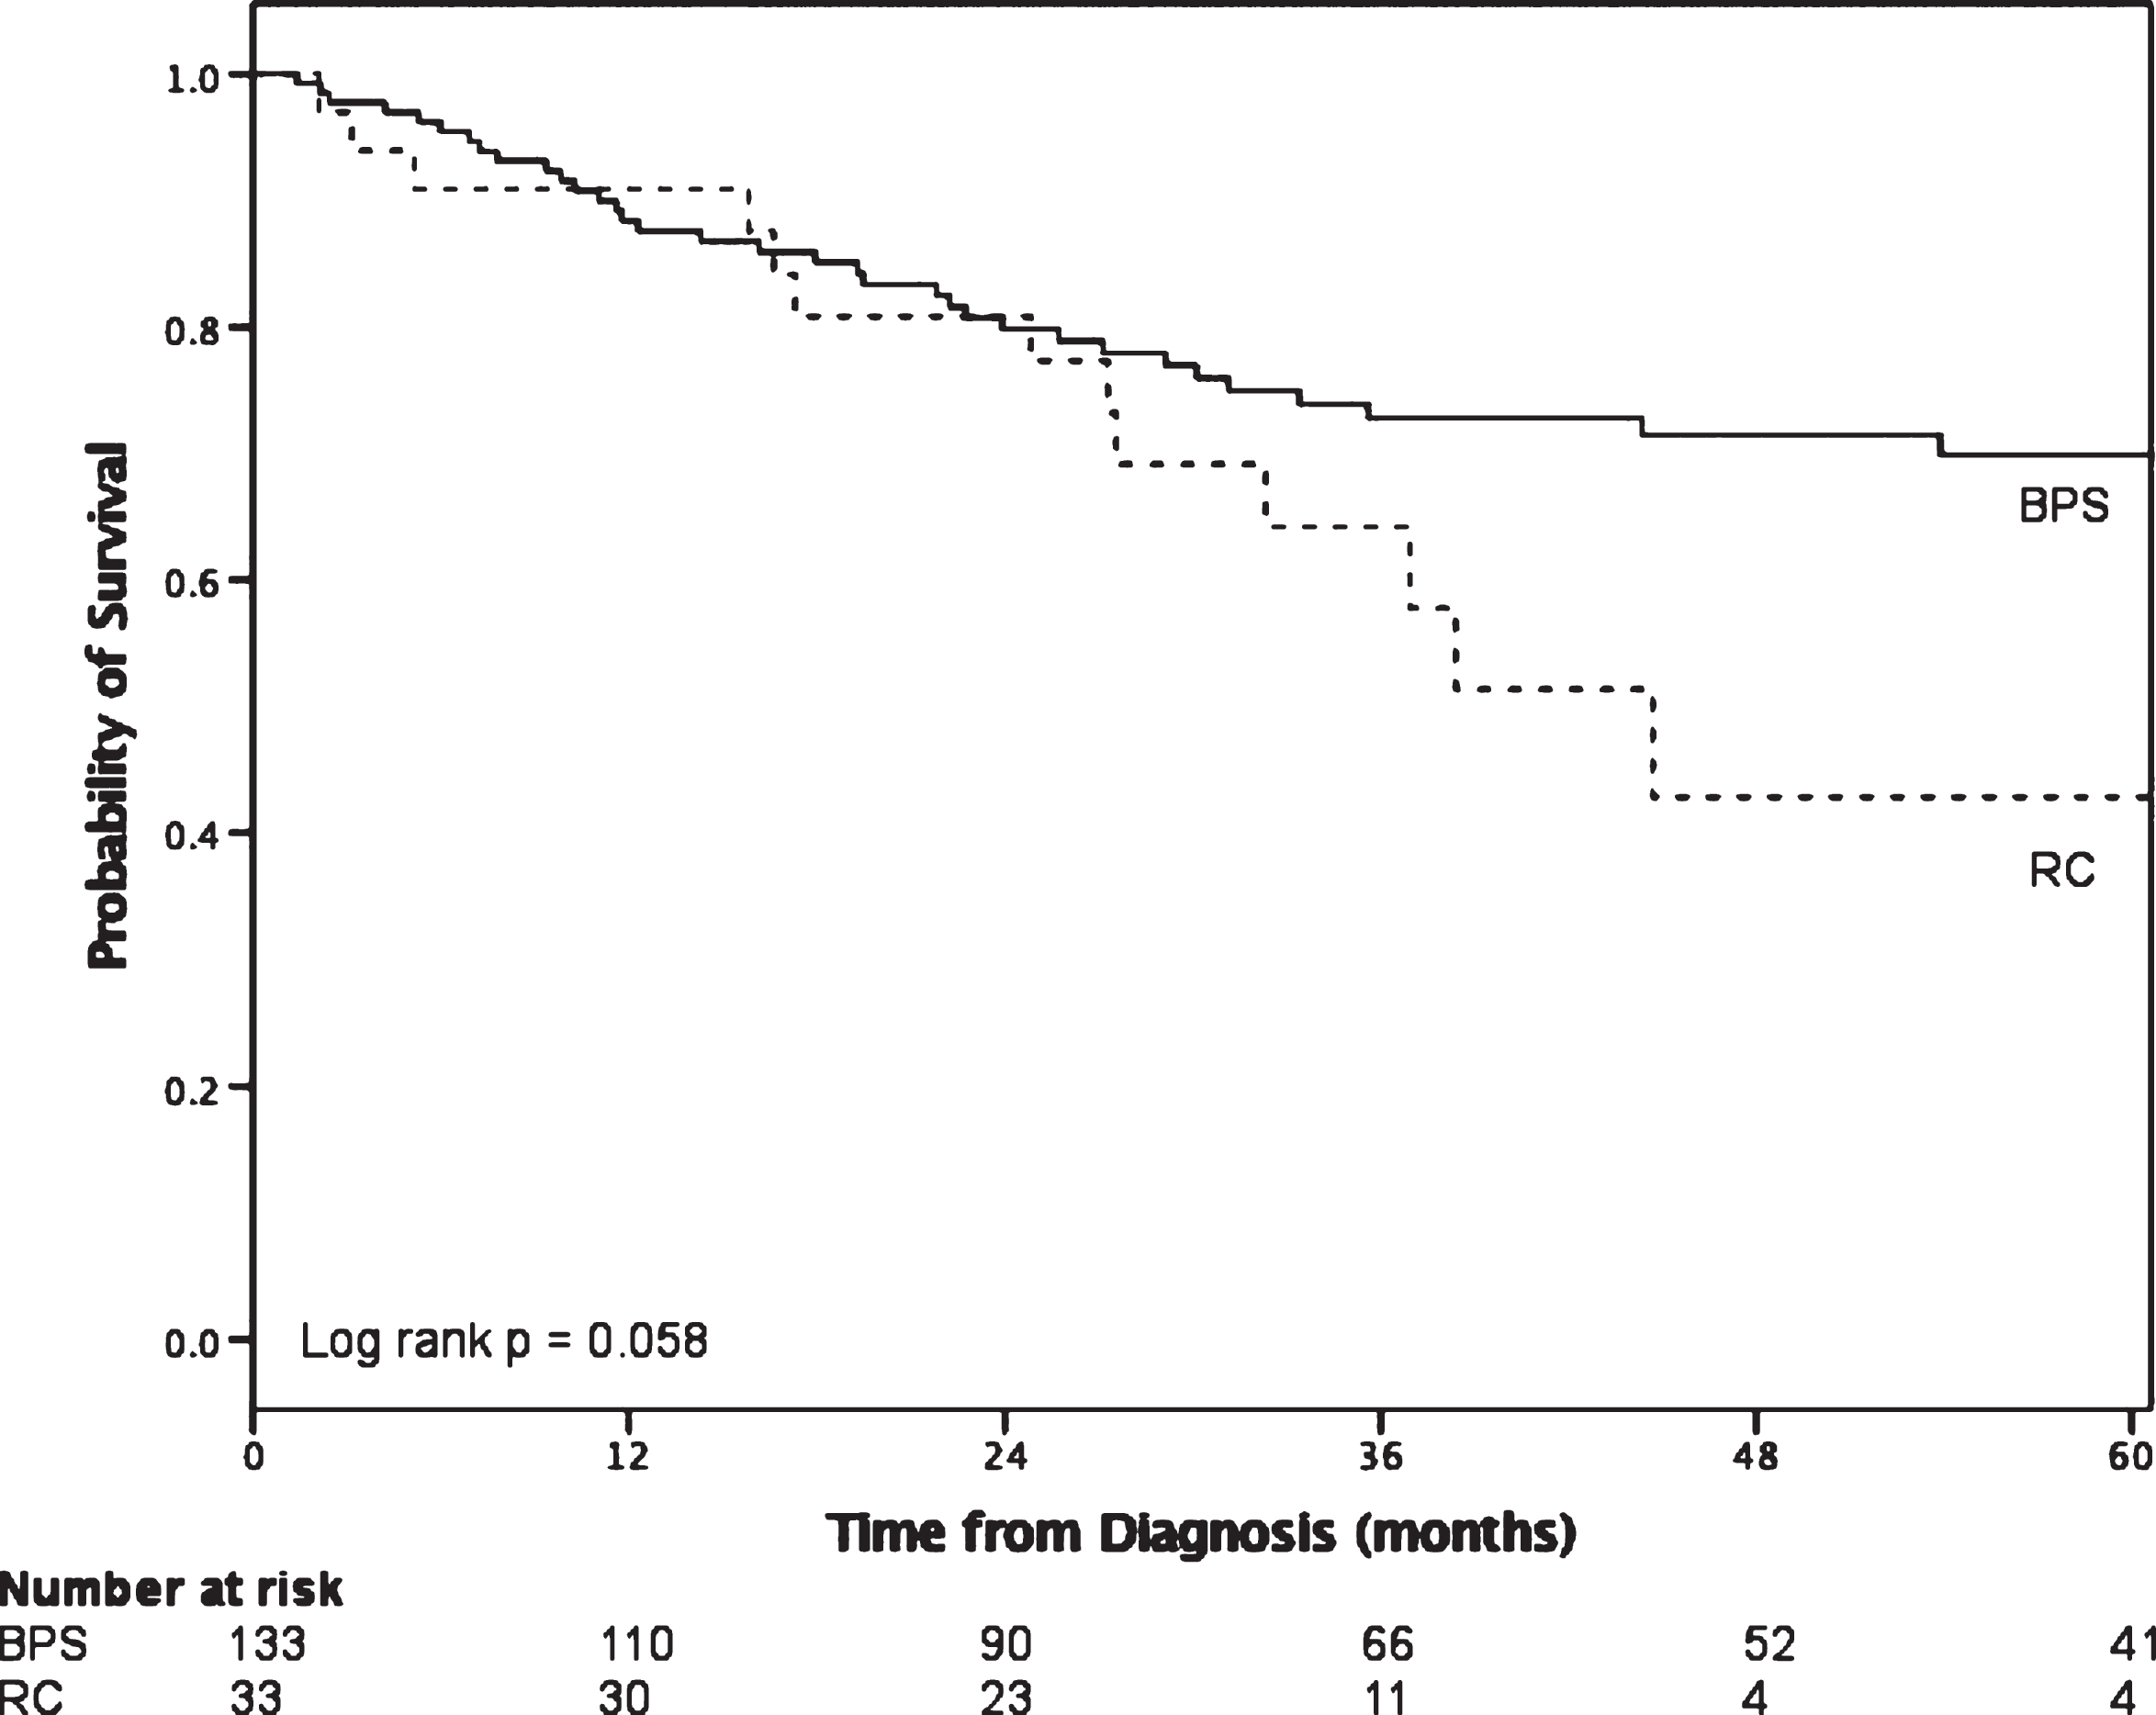 Survival outcomes of patients with cT1 disease who underwent BPS compared to RC.